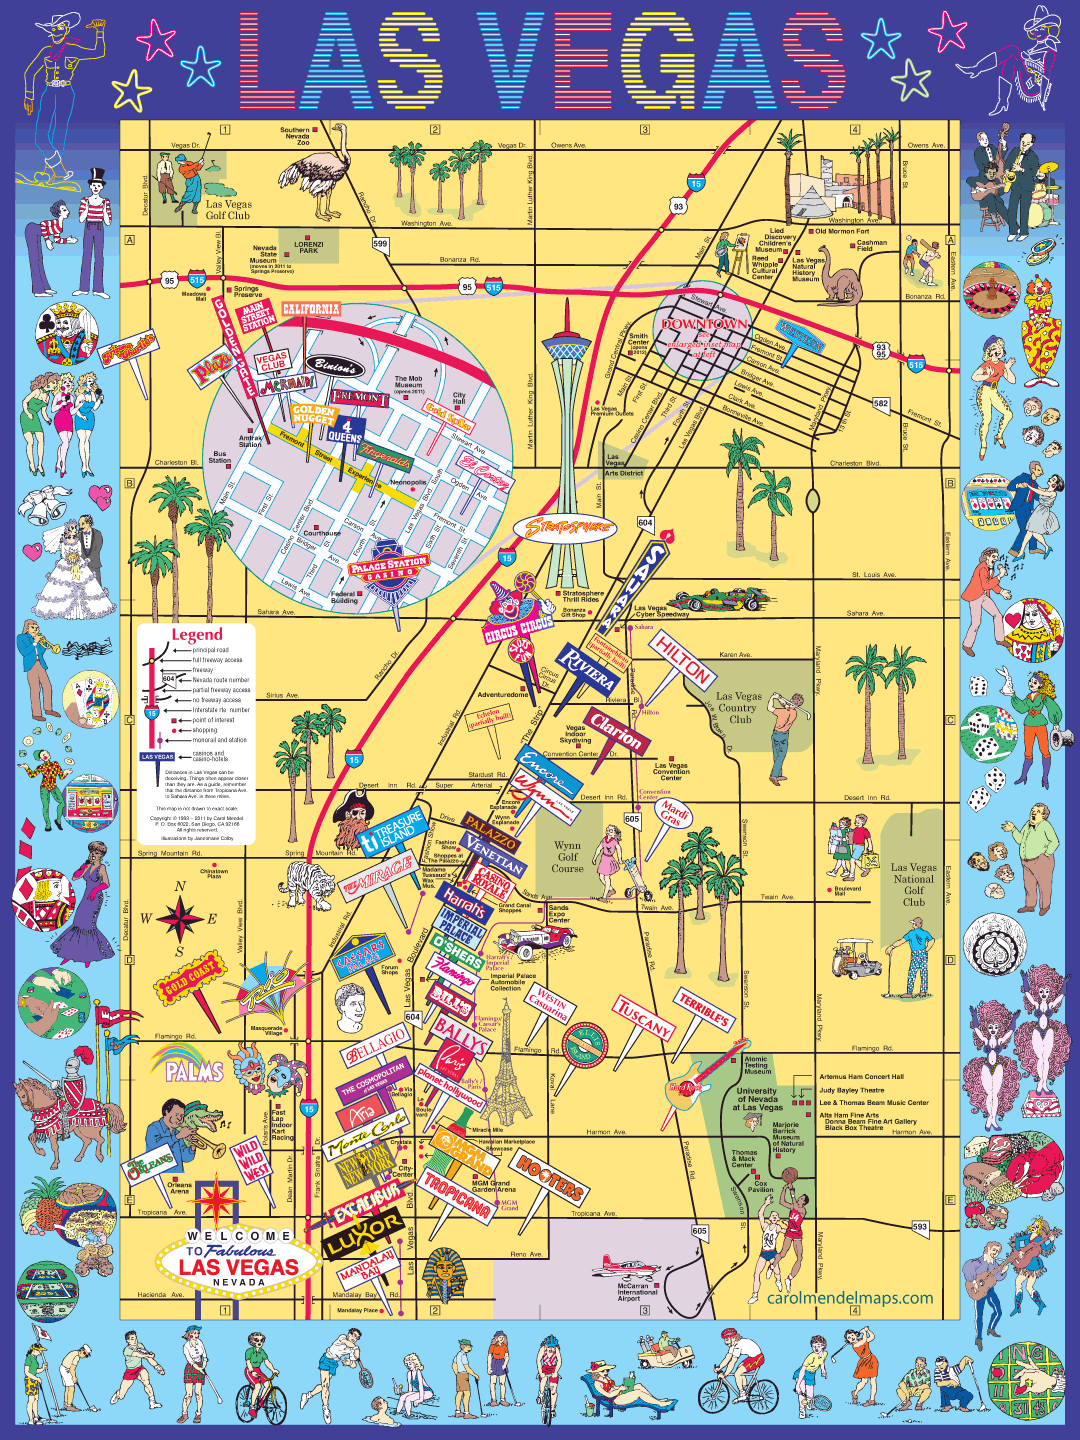 pictorial, illustrated map of Las Vegas